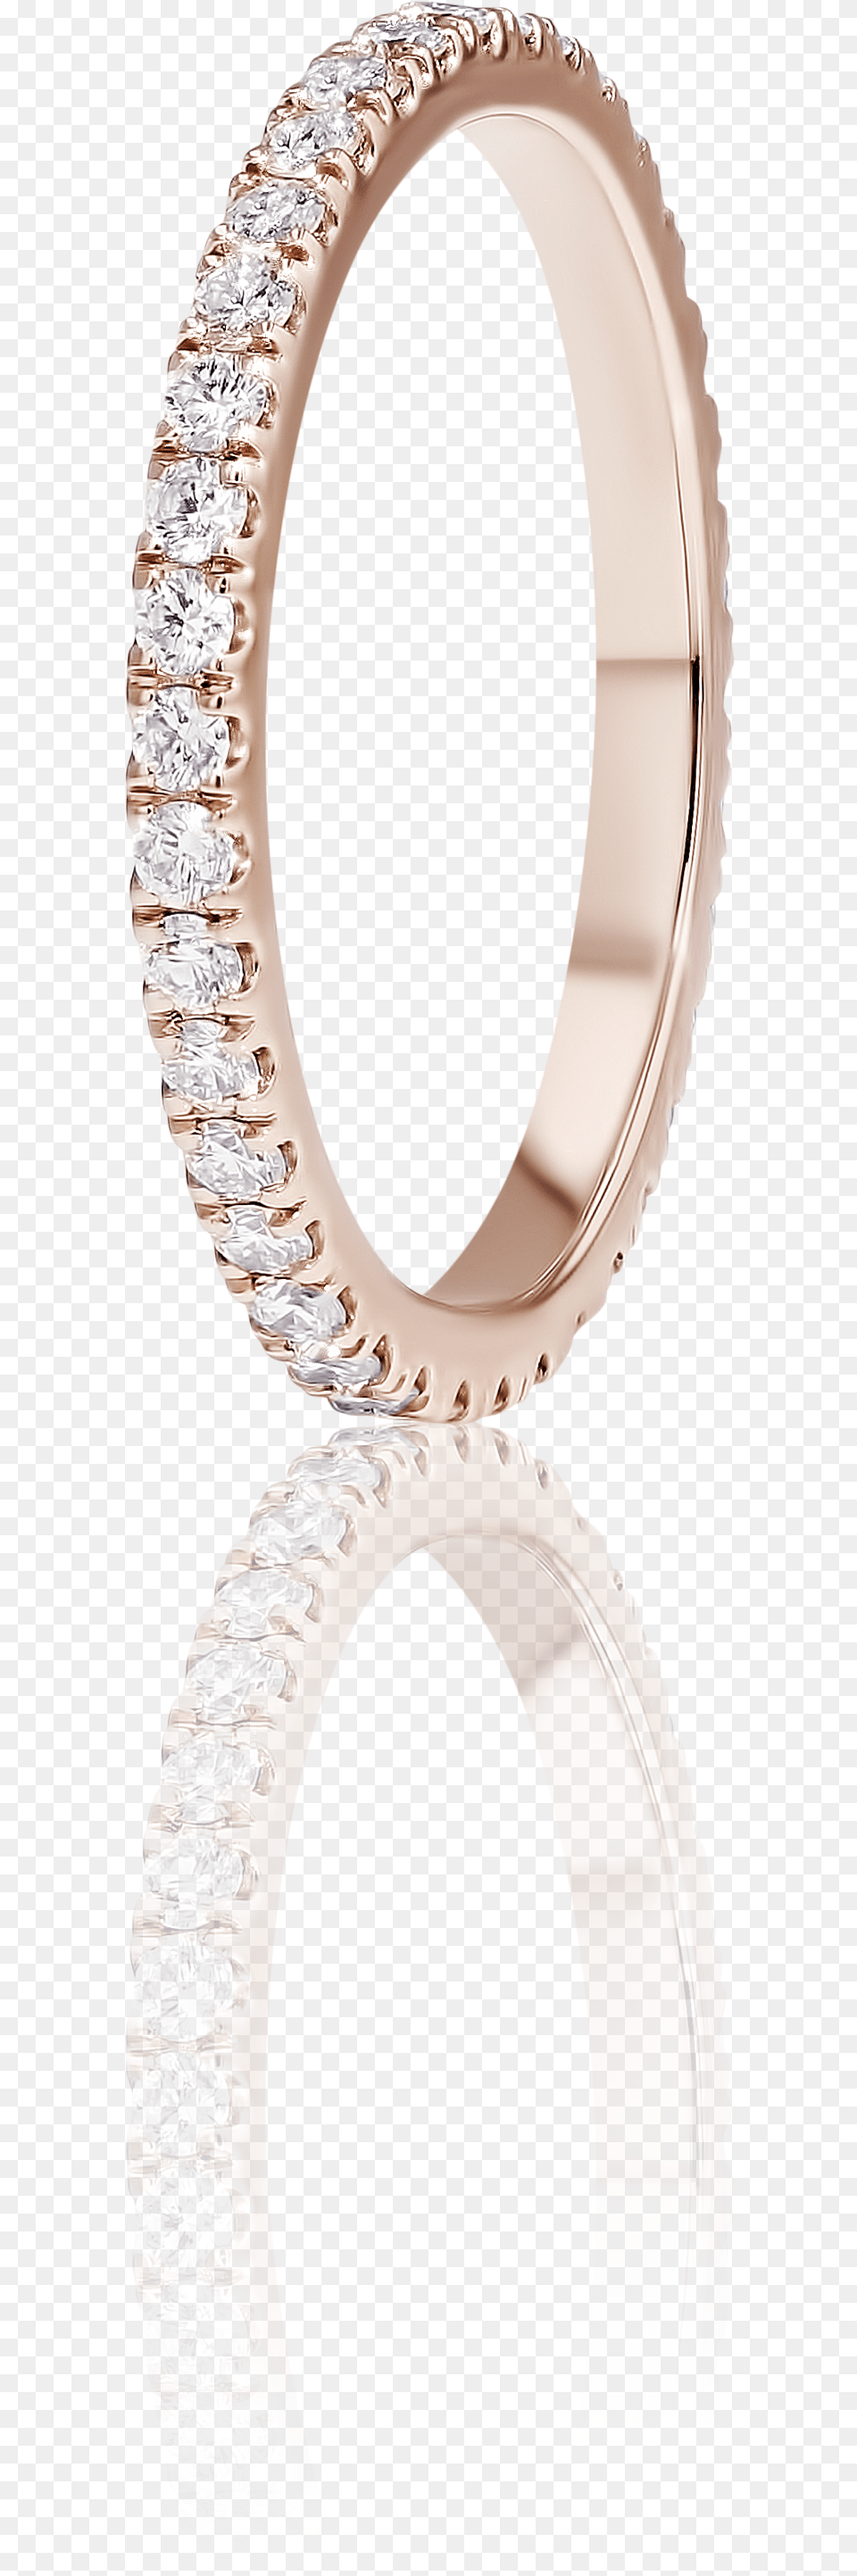 Pav Diamond Eternity Wedding Ring In 18k Pink Gold Engagement Ring, Accessories, Gemstone, Jewelry, Ornament Png Image